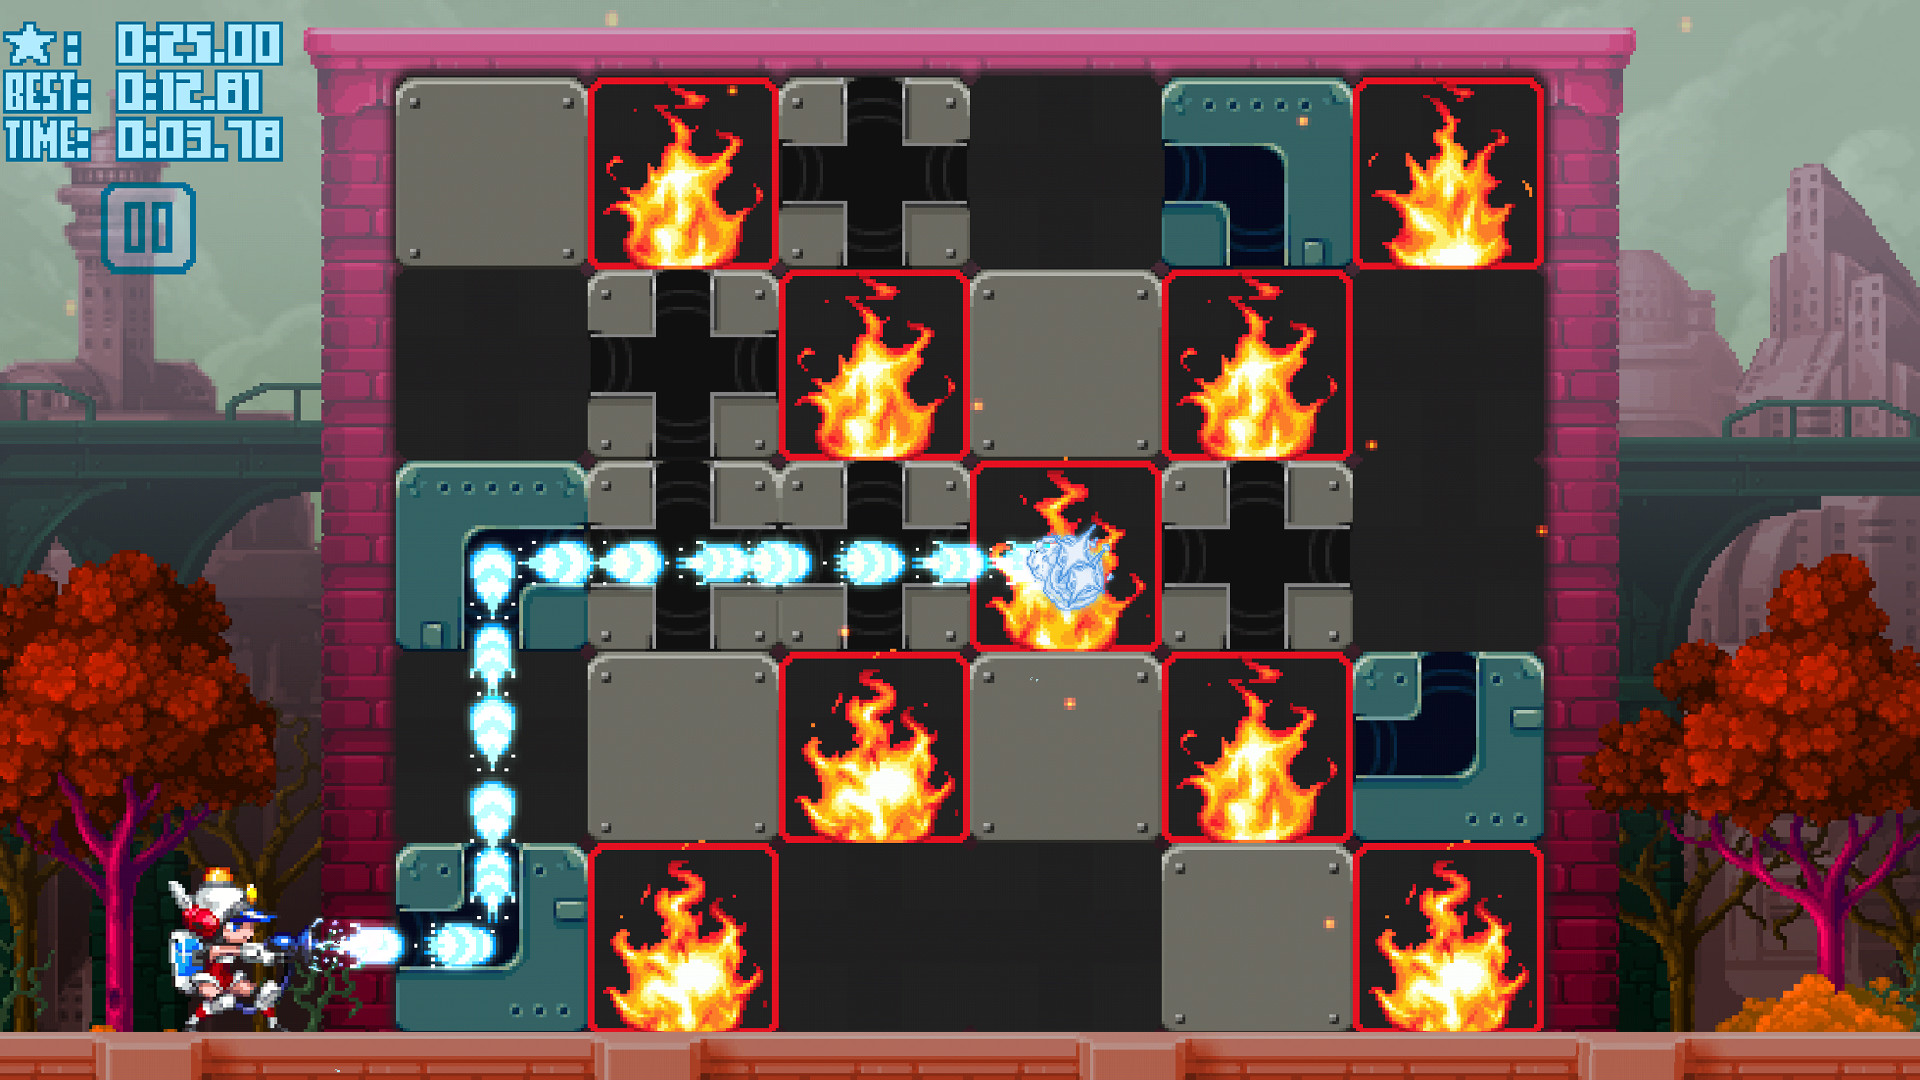 Mighty Switch Force! Hose It Down! on Steam